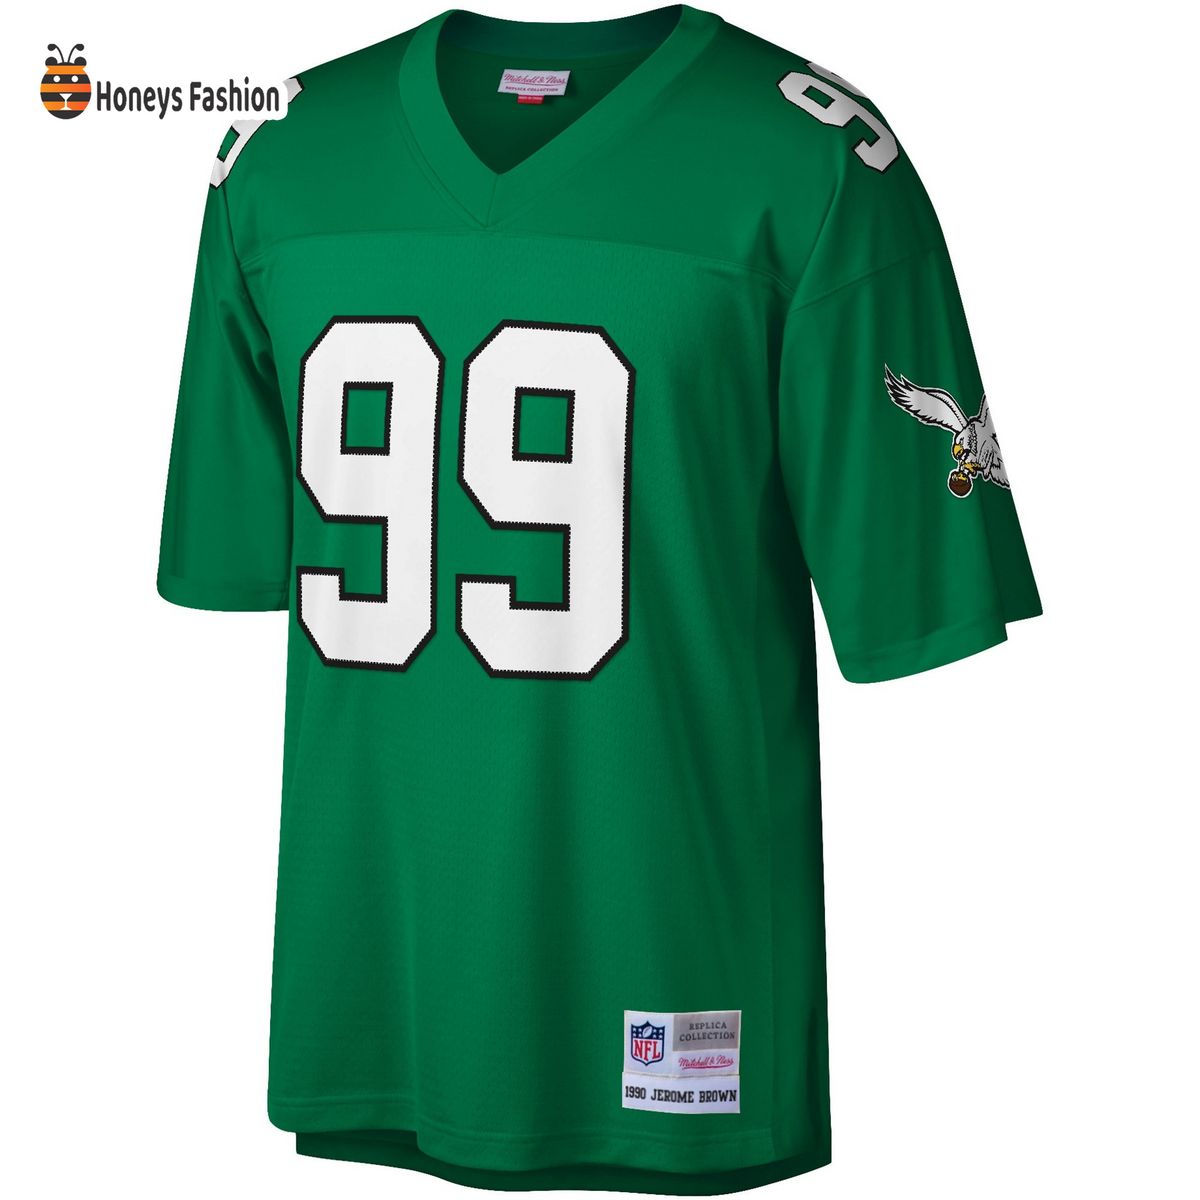 Jerome Brown Philadelphia Eagles Mitchell & Ness Legacy Kelly Green Jersey